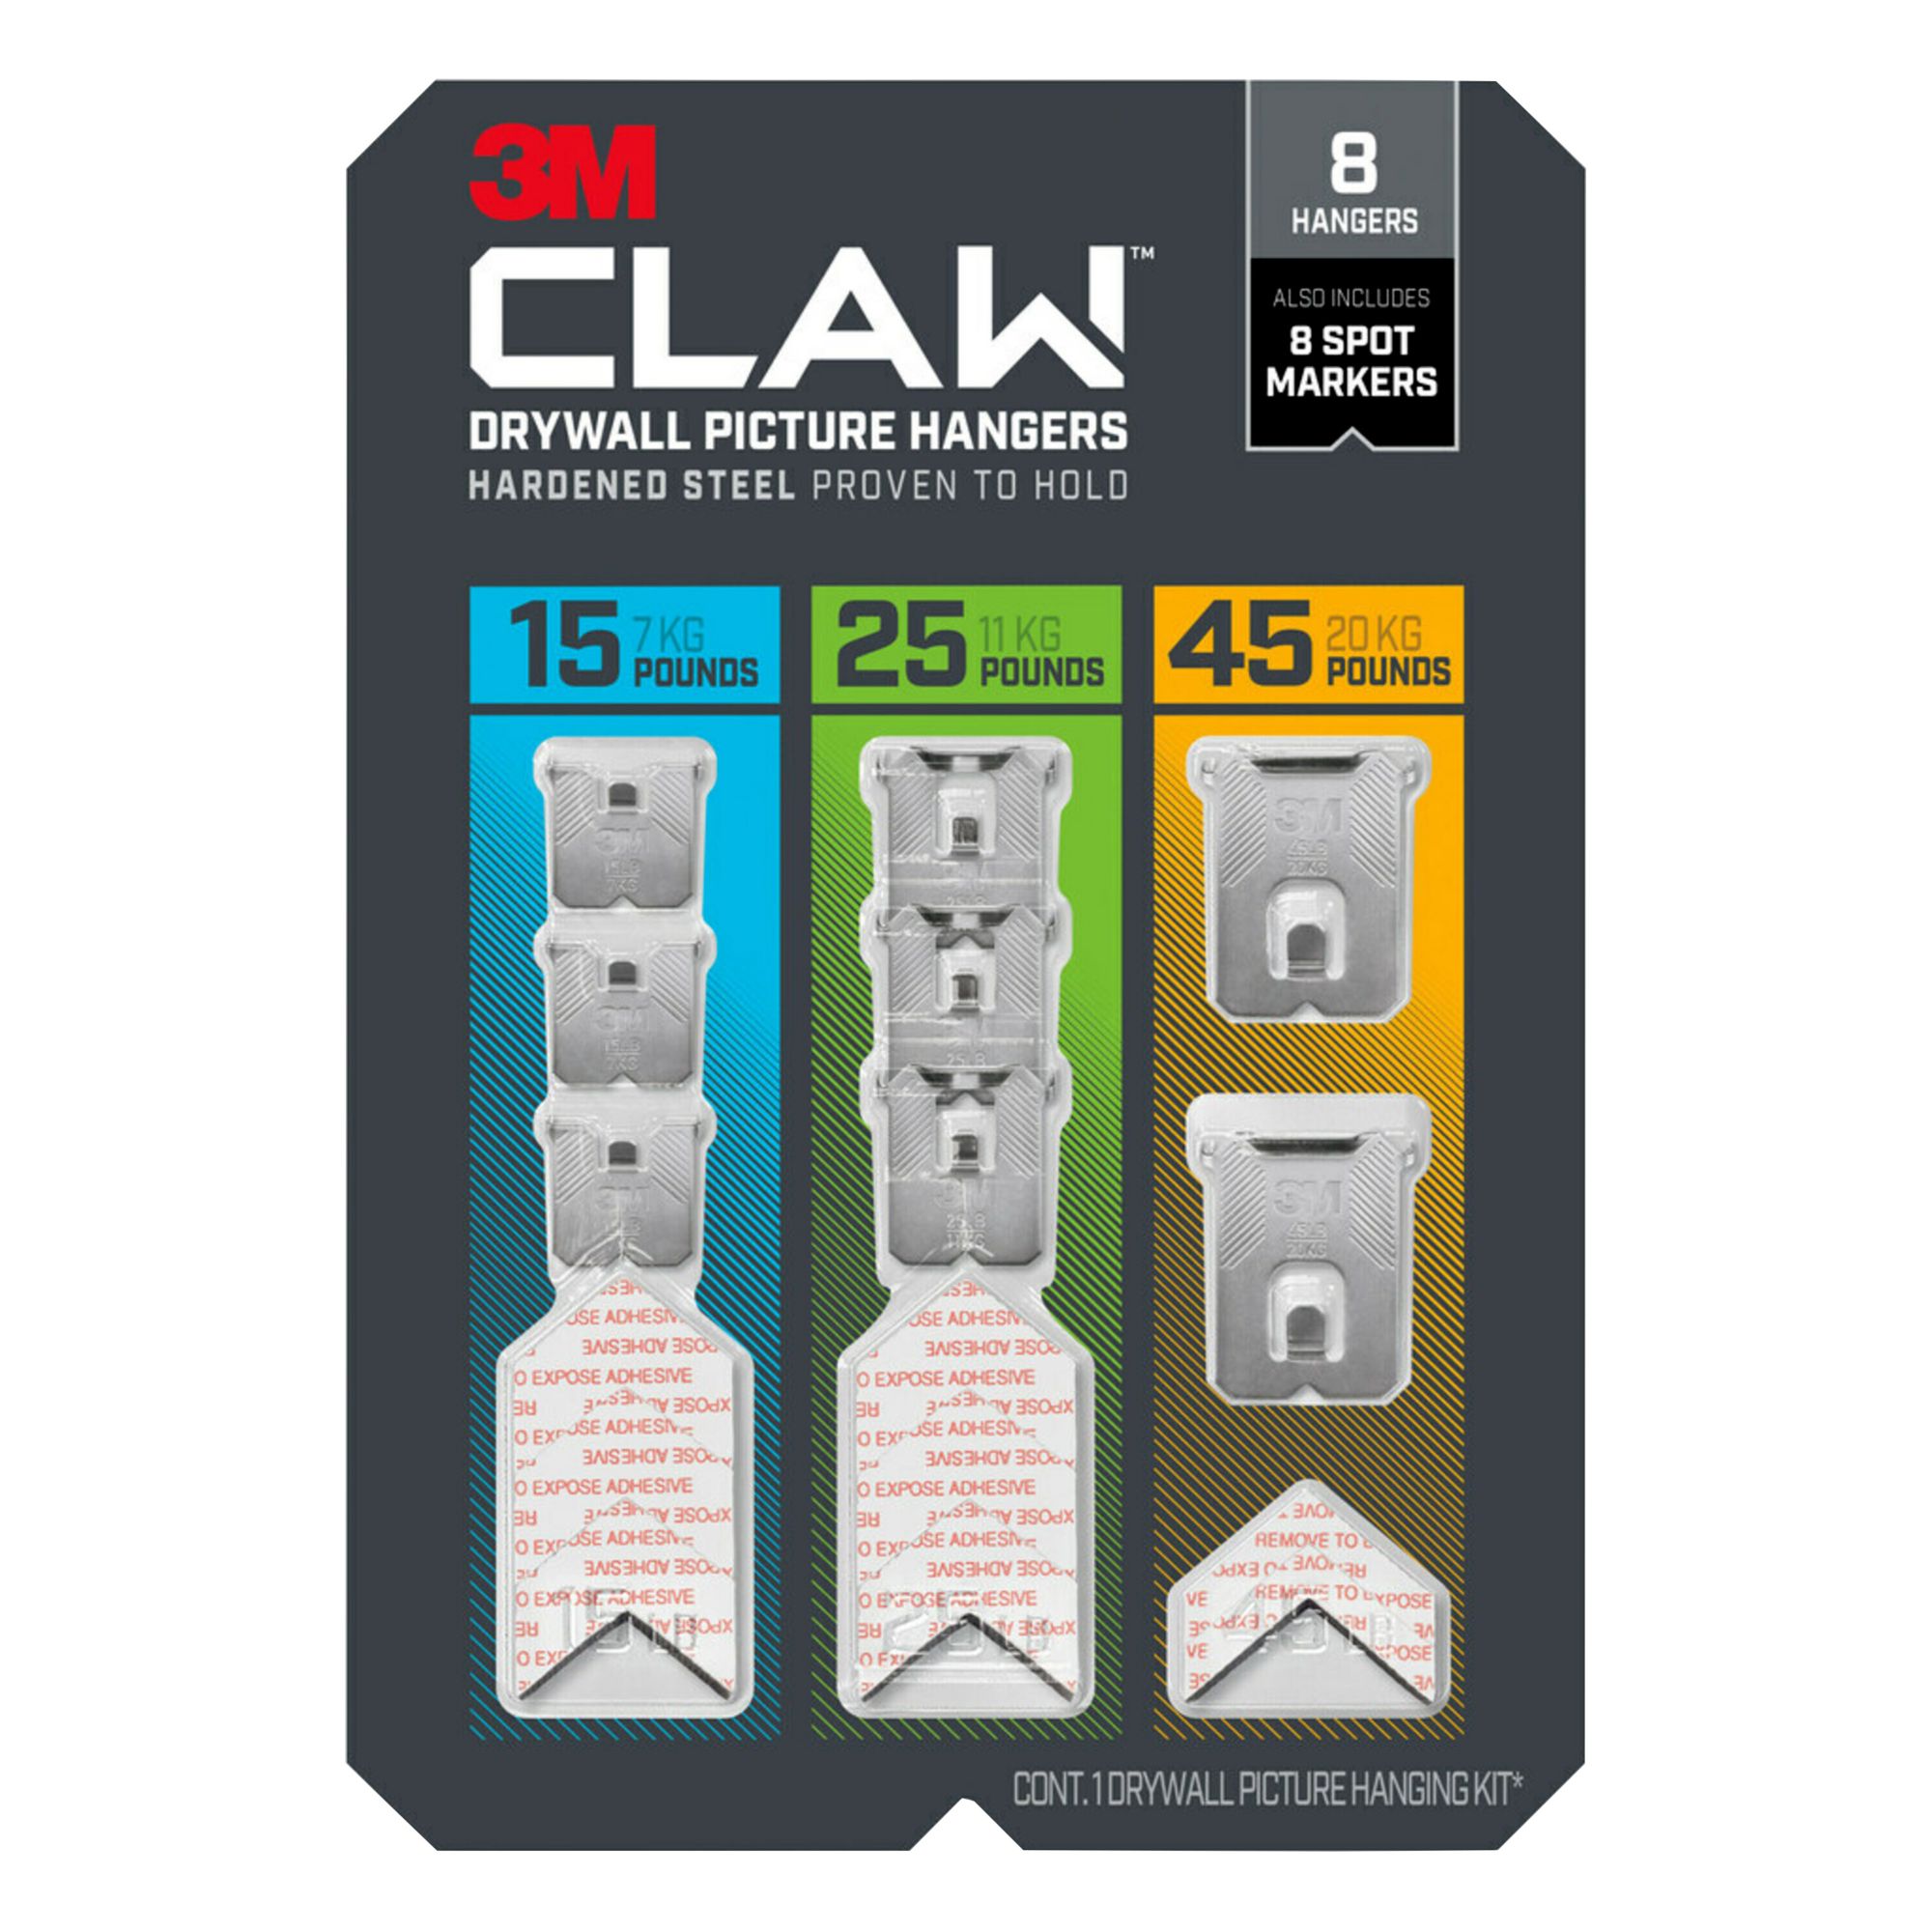 3M Claw Drywall Picture Hangers, 8 Hangers